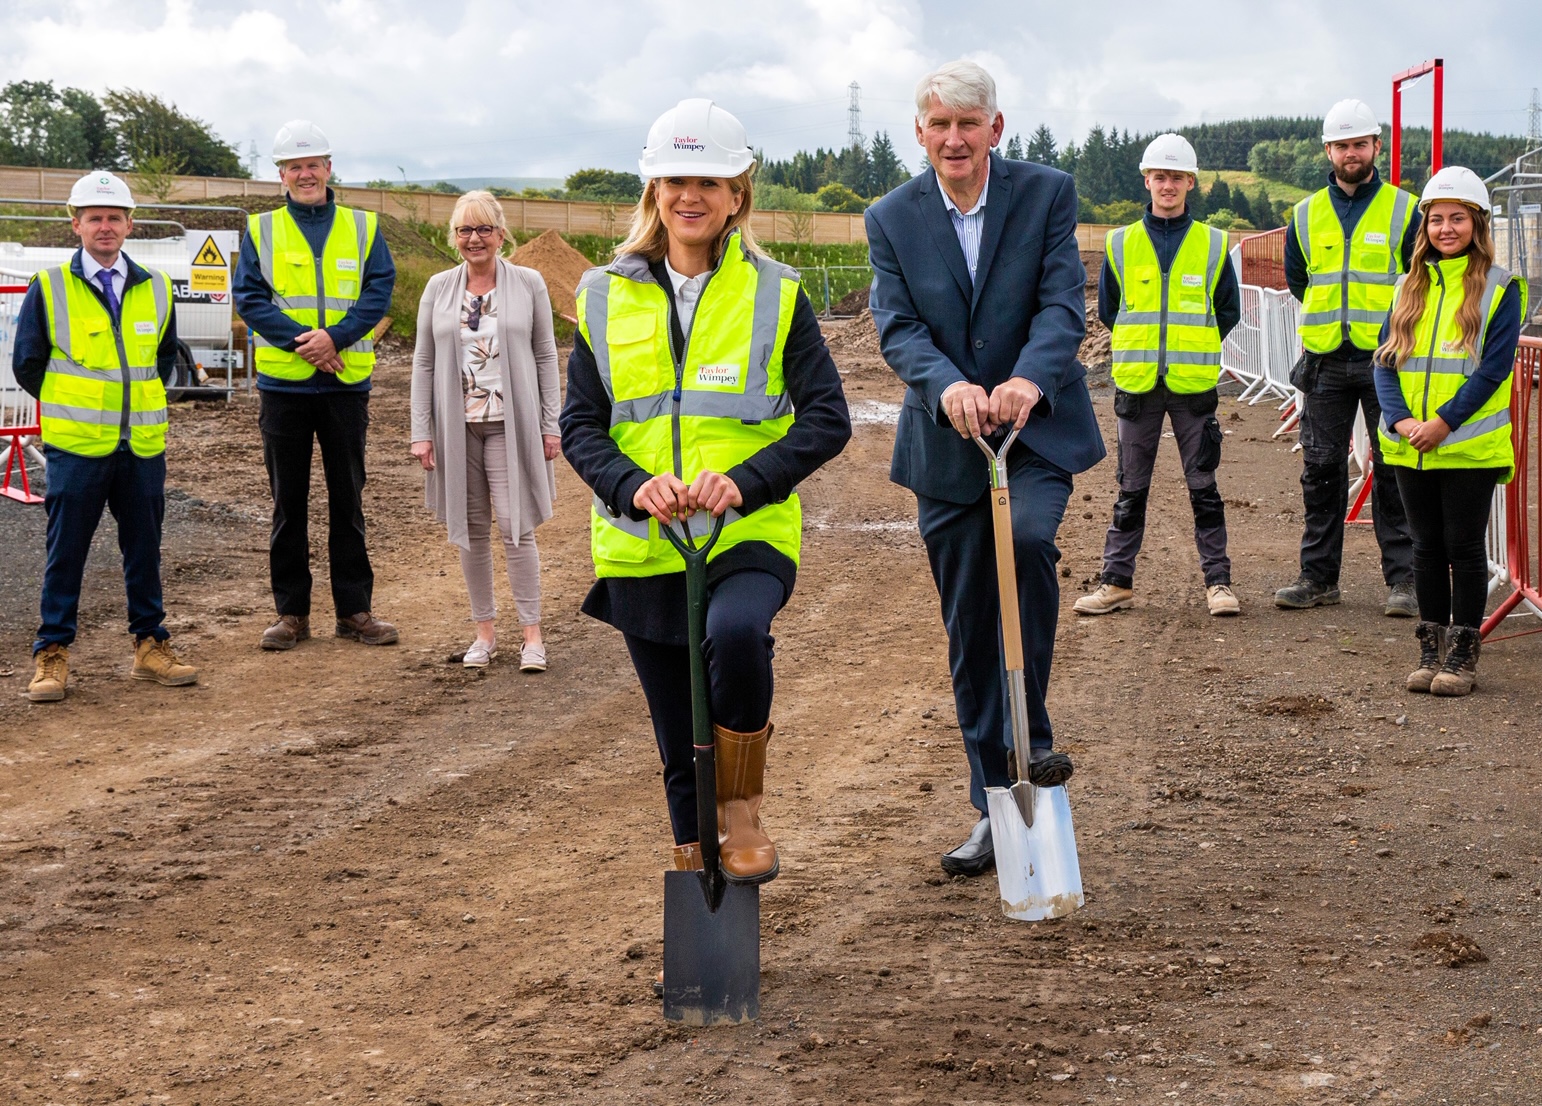 Ground breaks at first new council homes in Newton Mearns